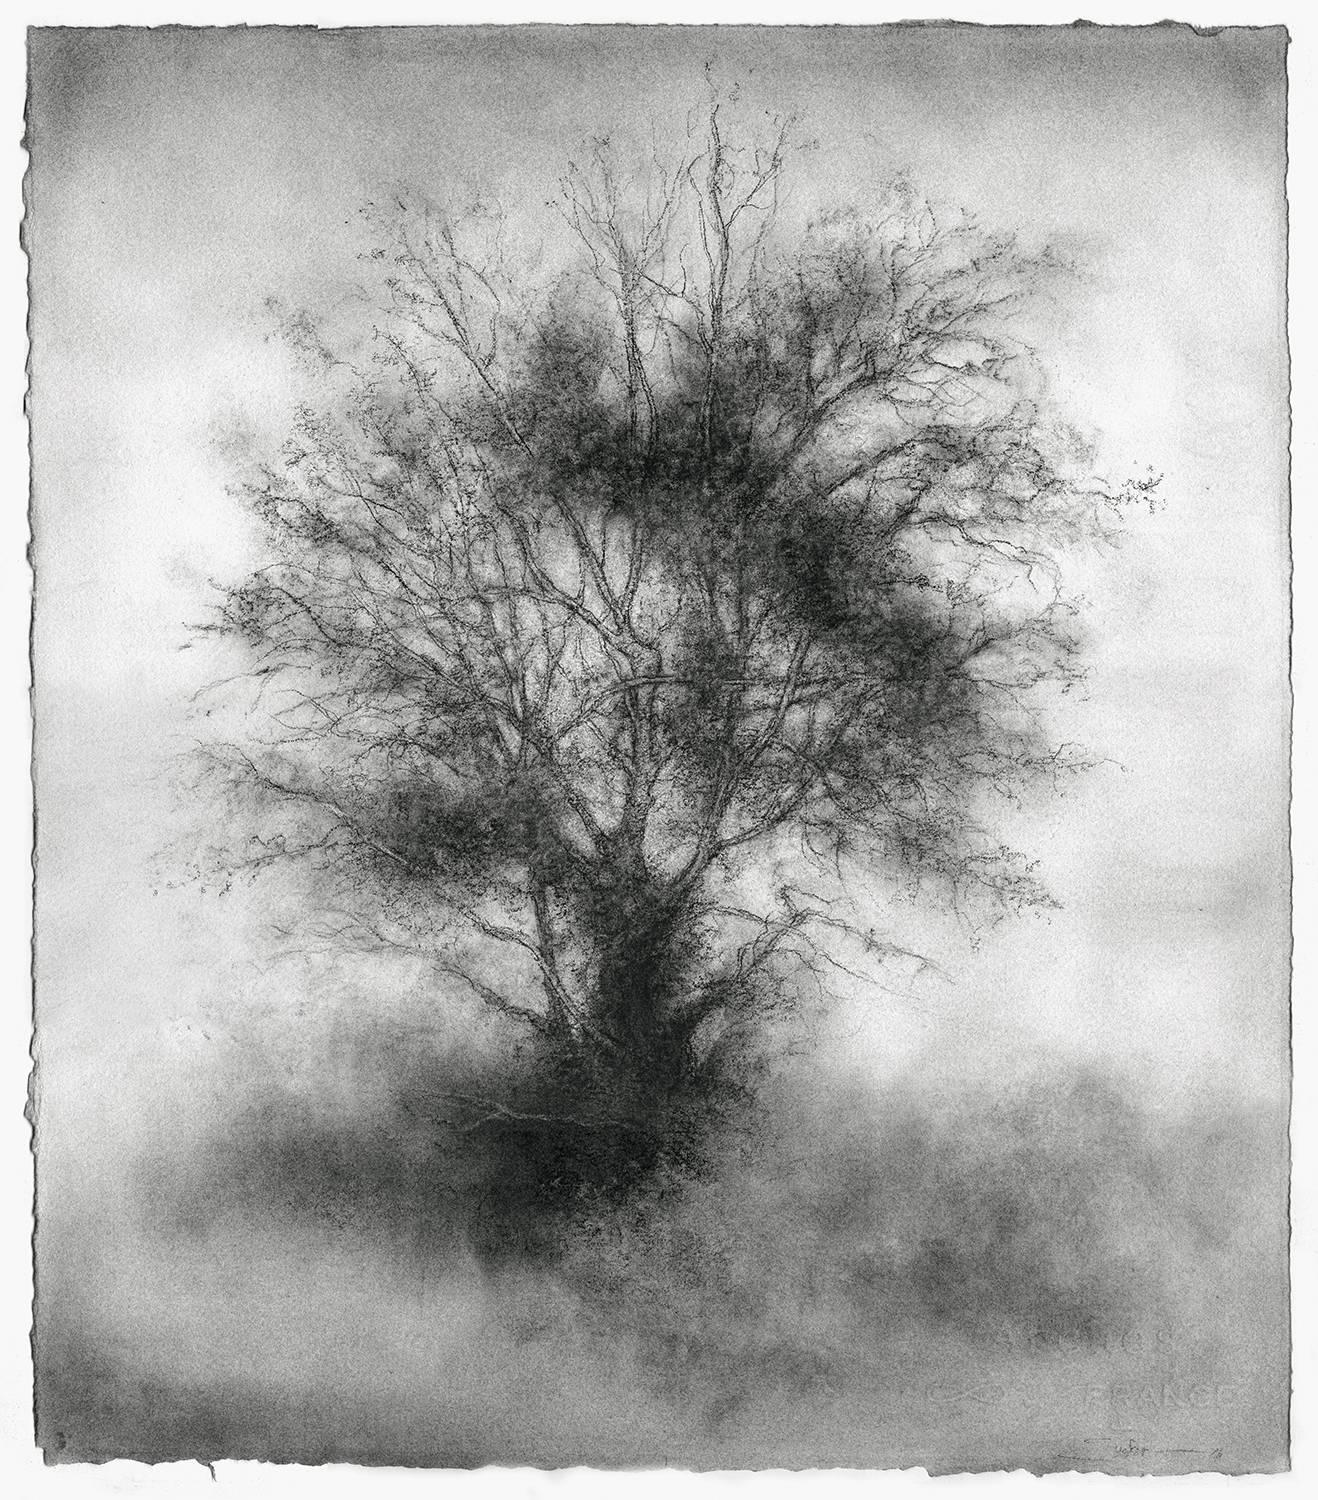 Sue Bryan Landscape Art - Greenhorn (Black & White Whimsical Tree Landscape Charcoal Drawing on Paper)